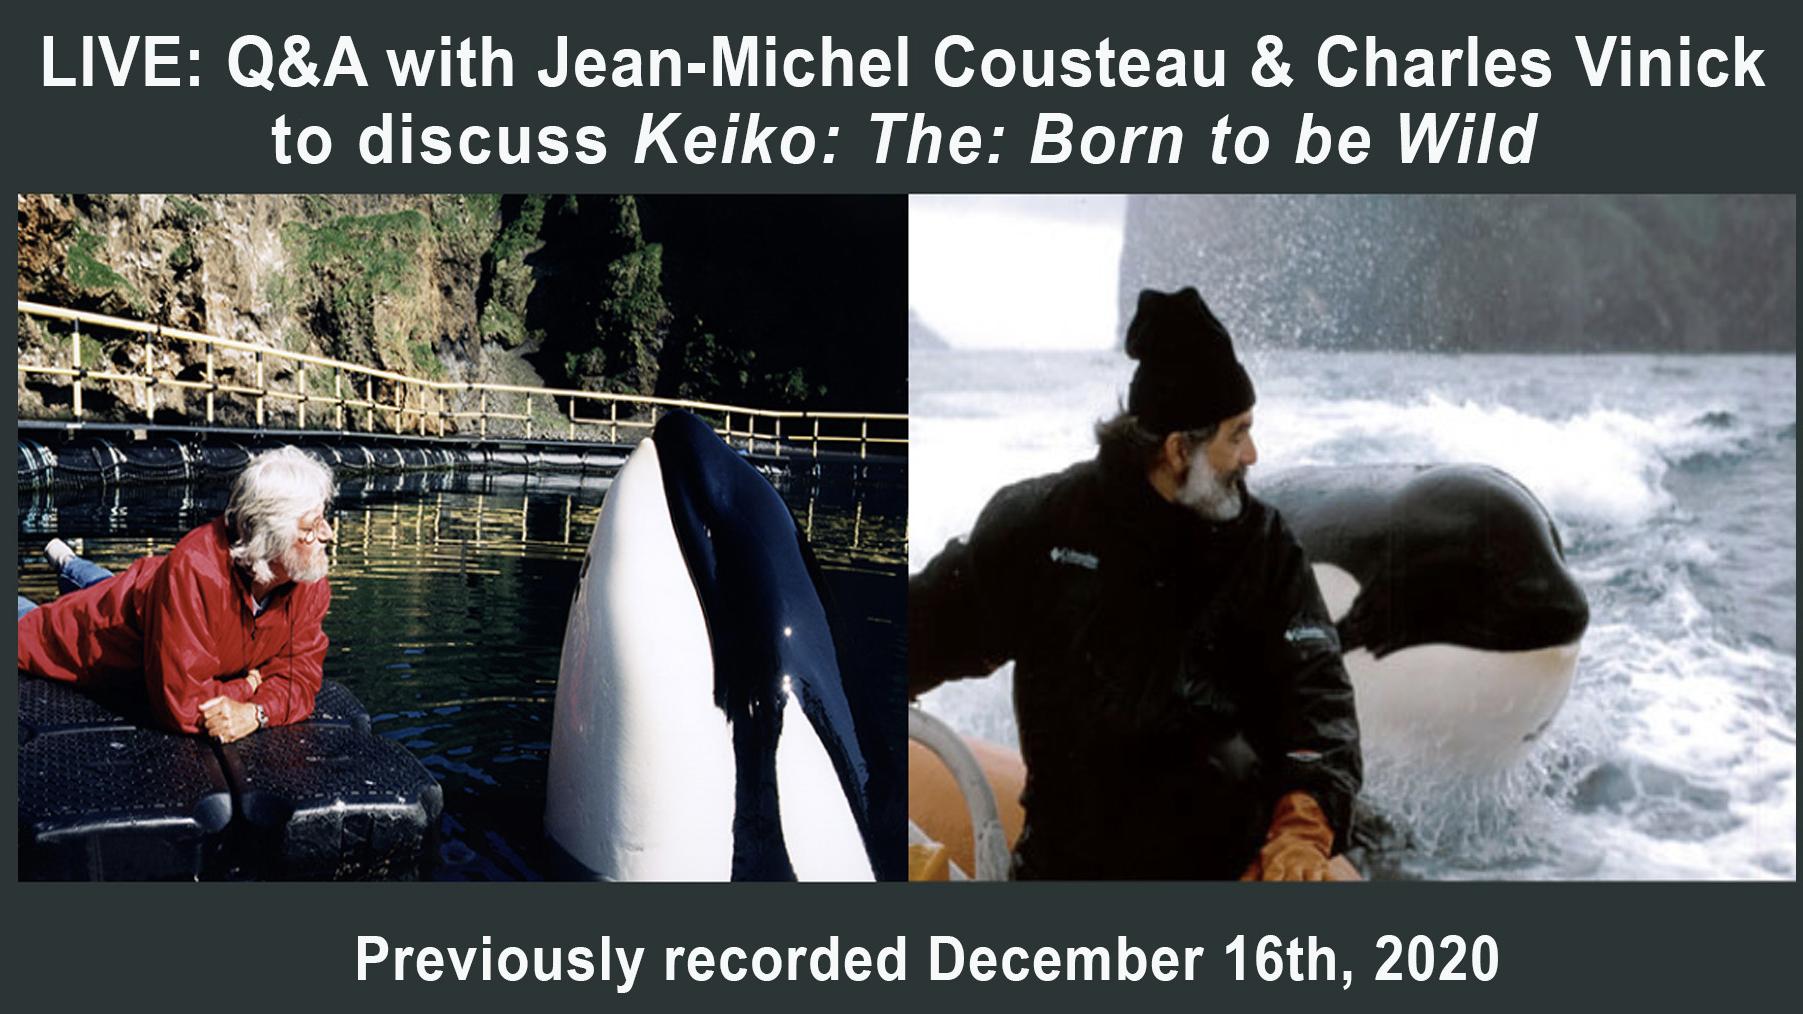 LIVE Q&A w/ Jean-Michel Cousteau & Charles Vinick for Keiko: Born to be Wild